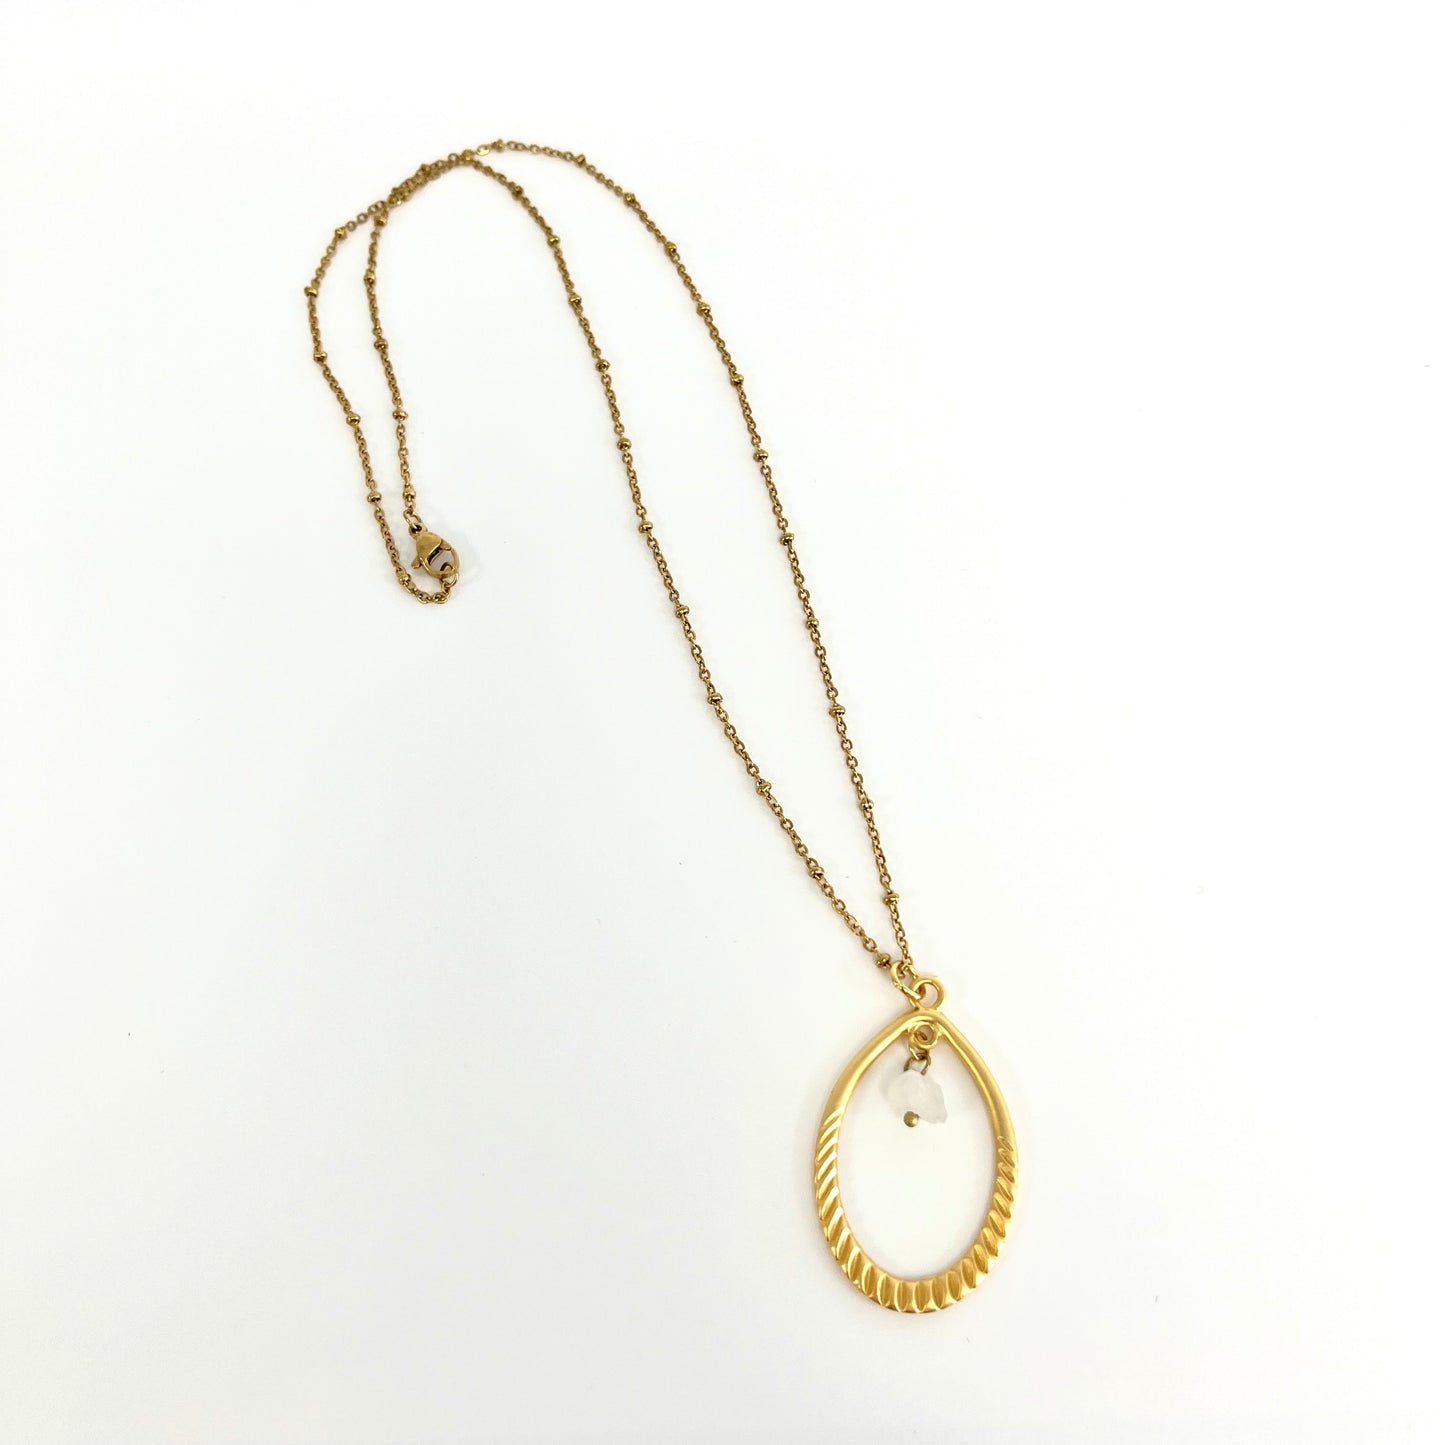 The Bella Necklace in Gold